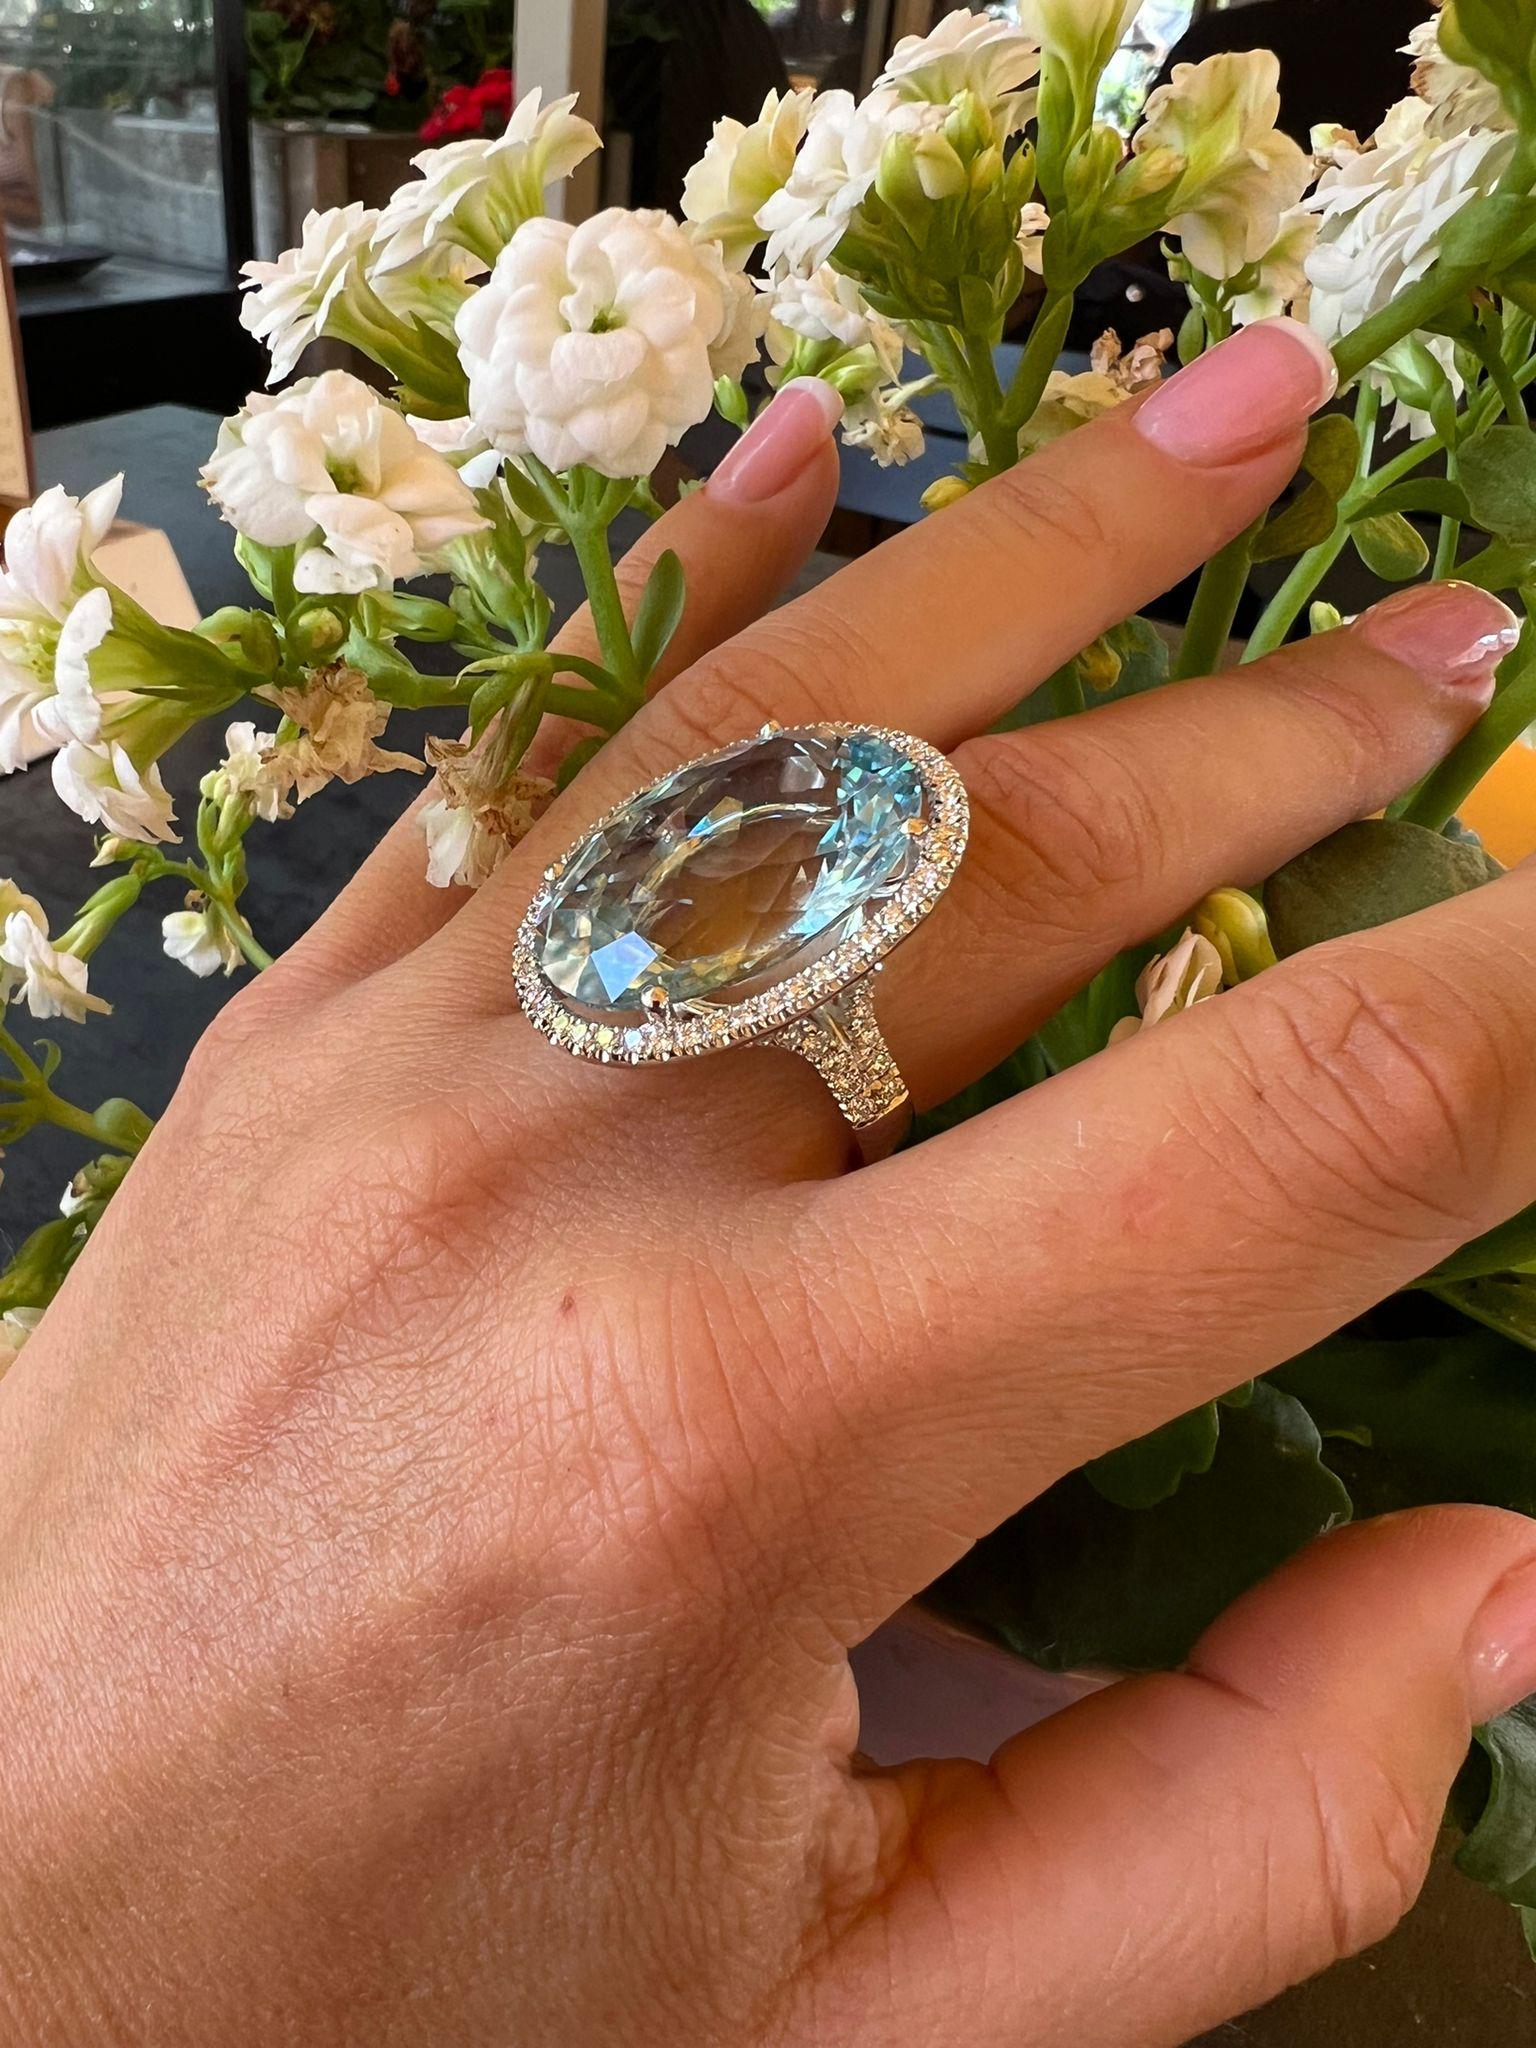 ALGT Certified 34 Carat Sky Blue Topaz Whaite Gold  Diamond Cocktail Ring For Sale 3